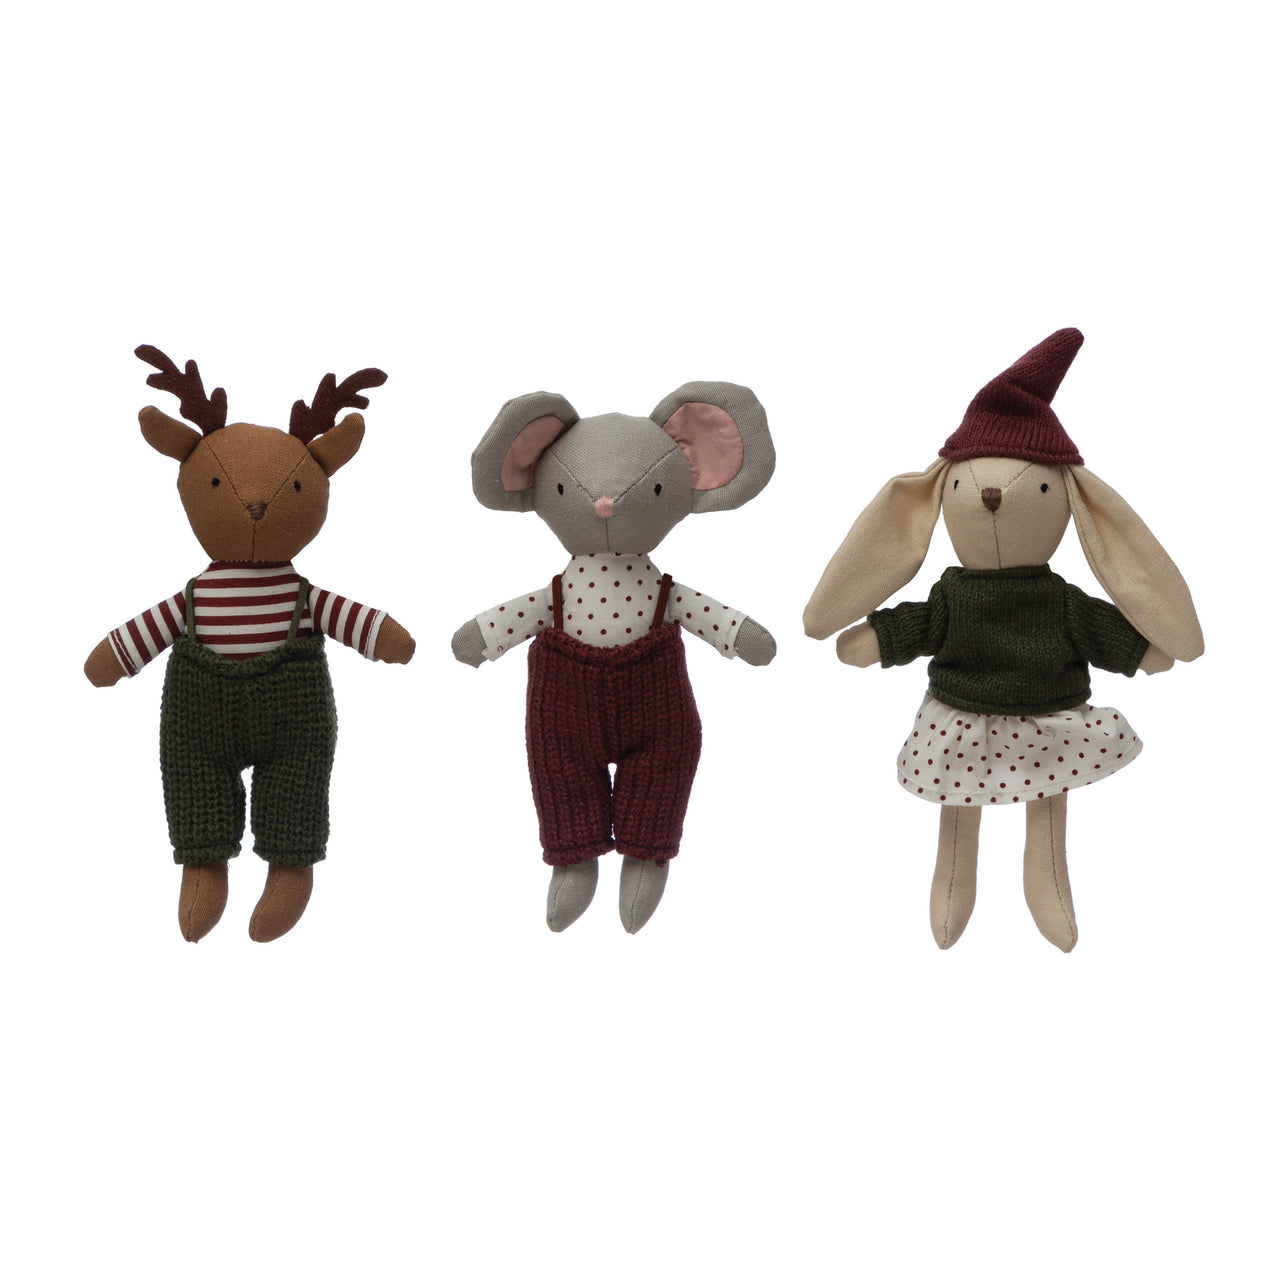 Plush Animal Toys with Overalls and Sweater